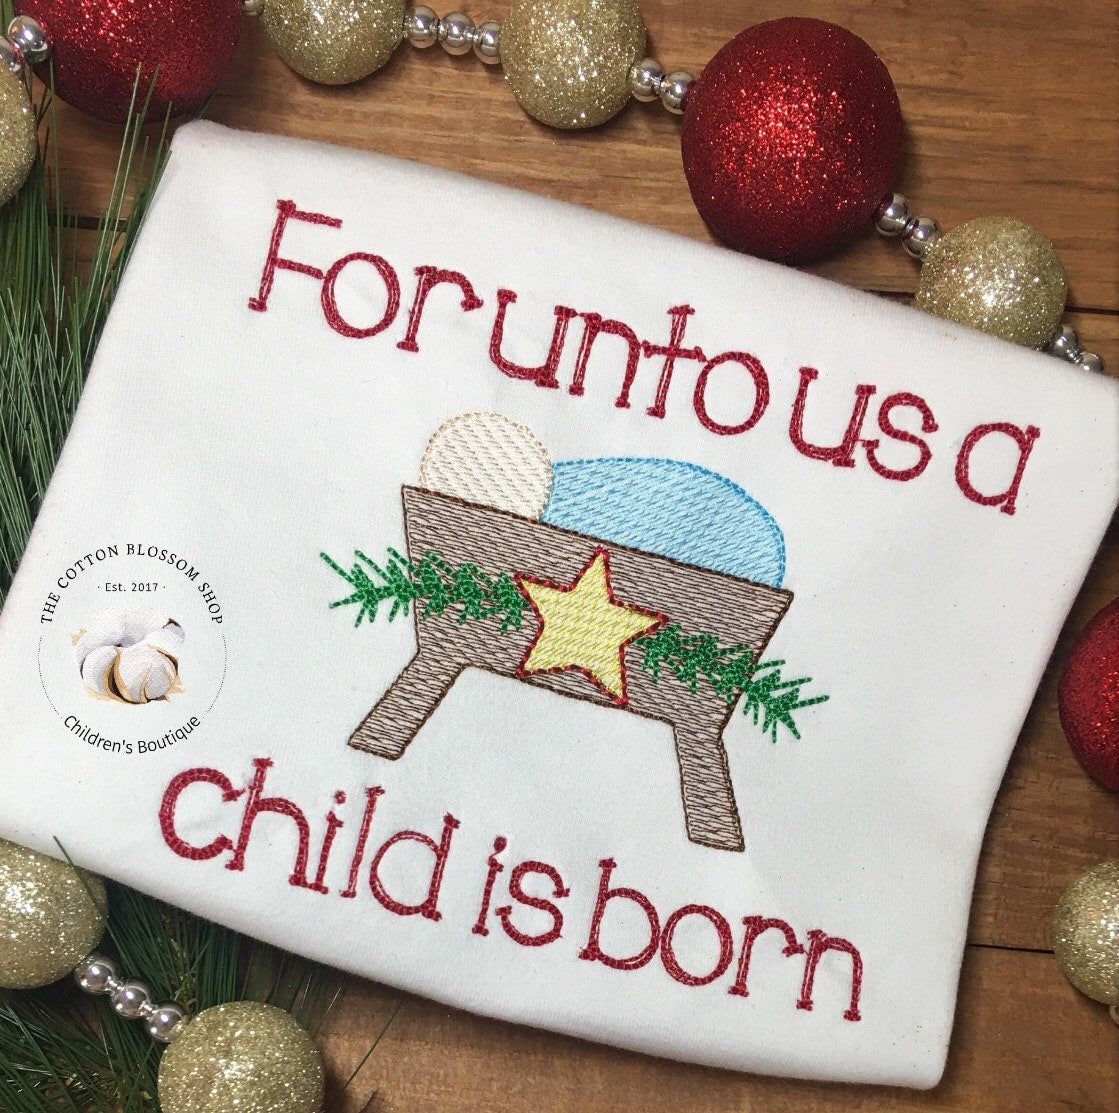 Christmas Nativity Shirt, For unto us a child is born embroidered shirt